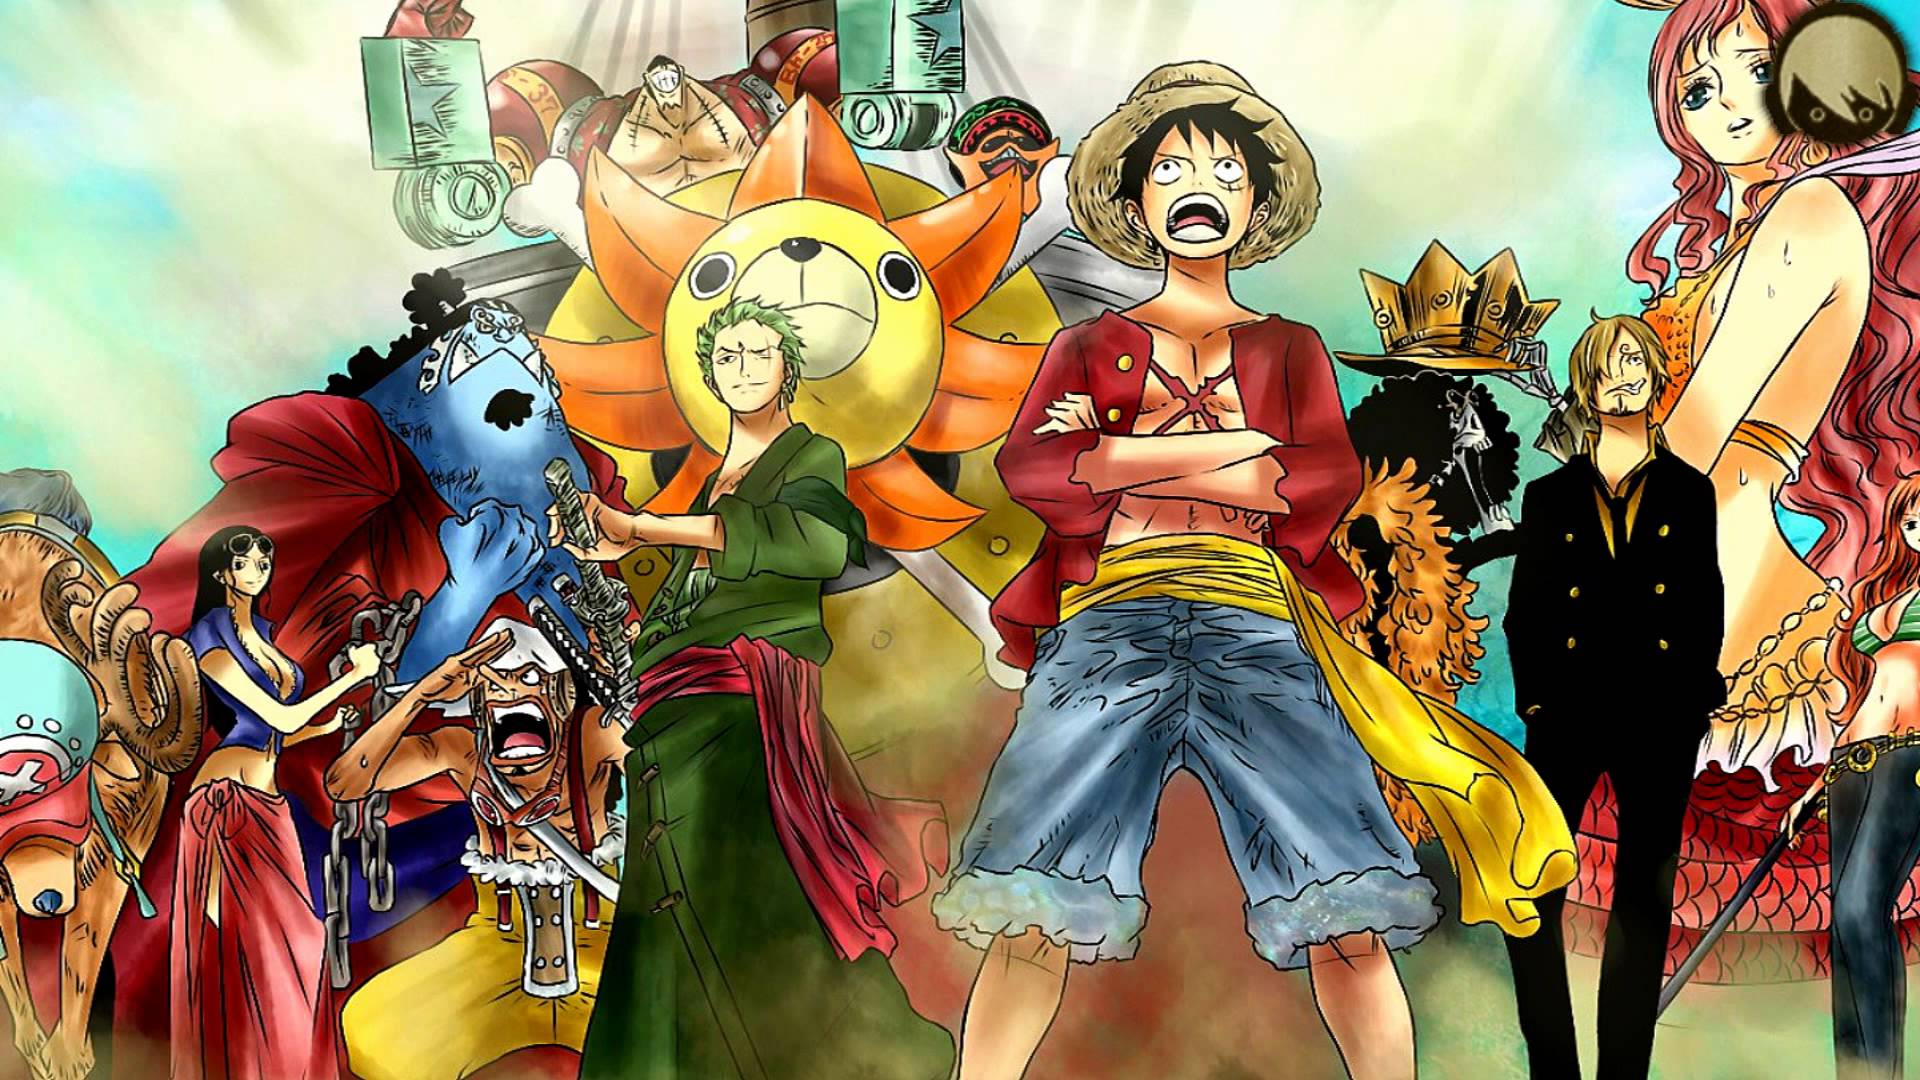 4k PC One Piece Wallpapers - Wallpaper Cave